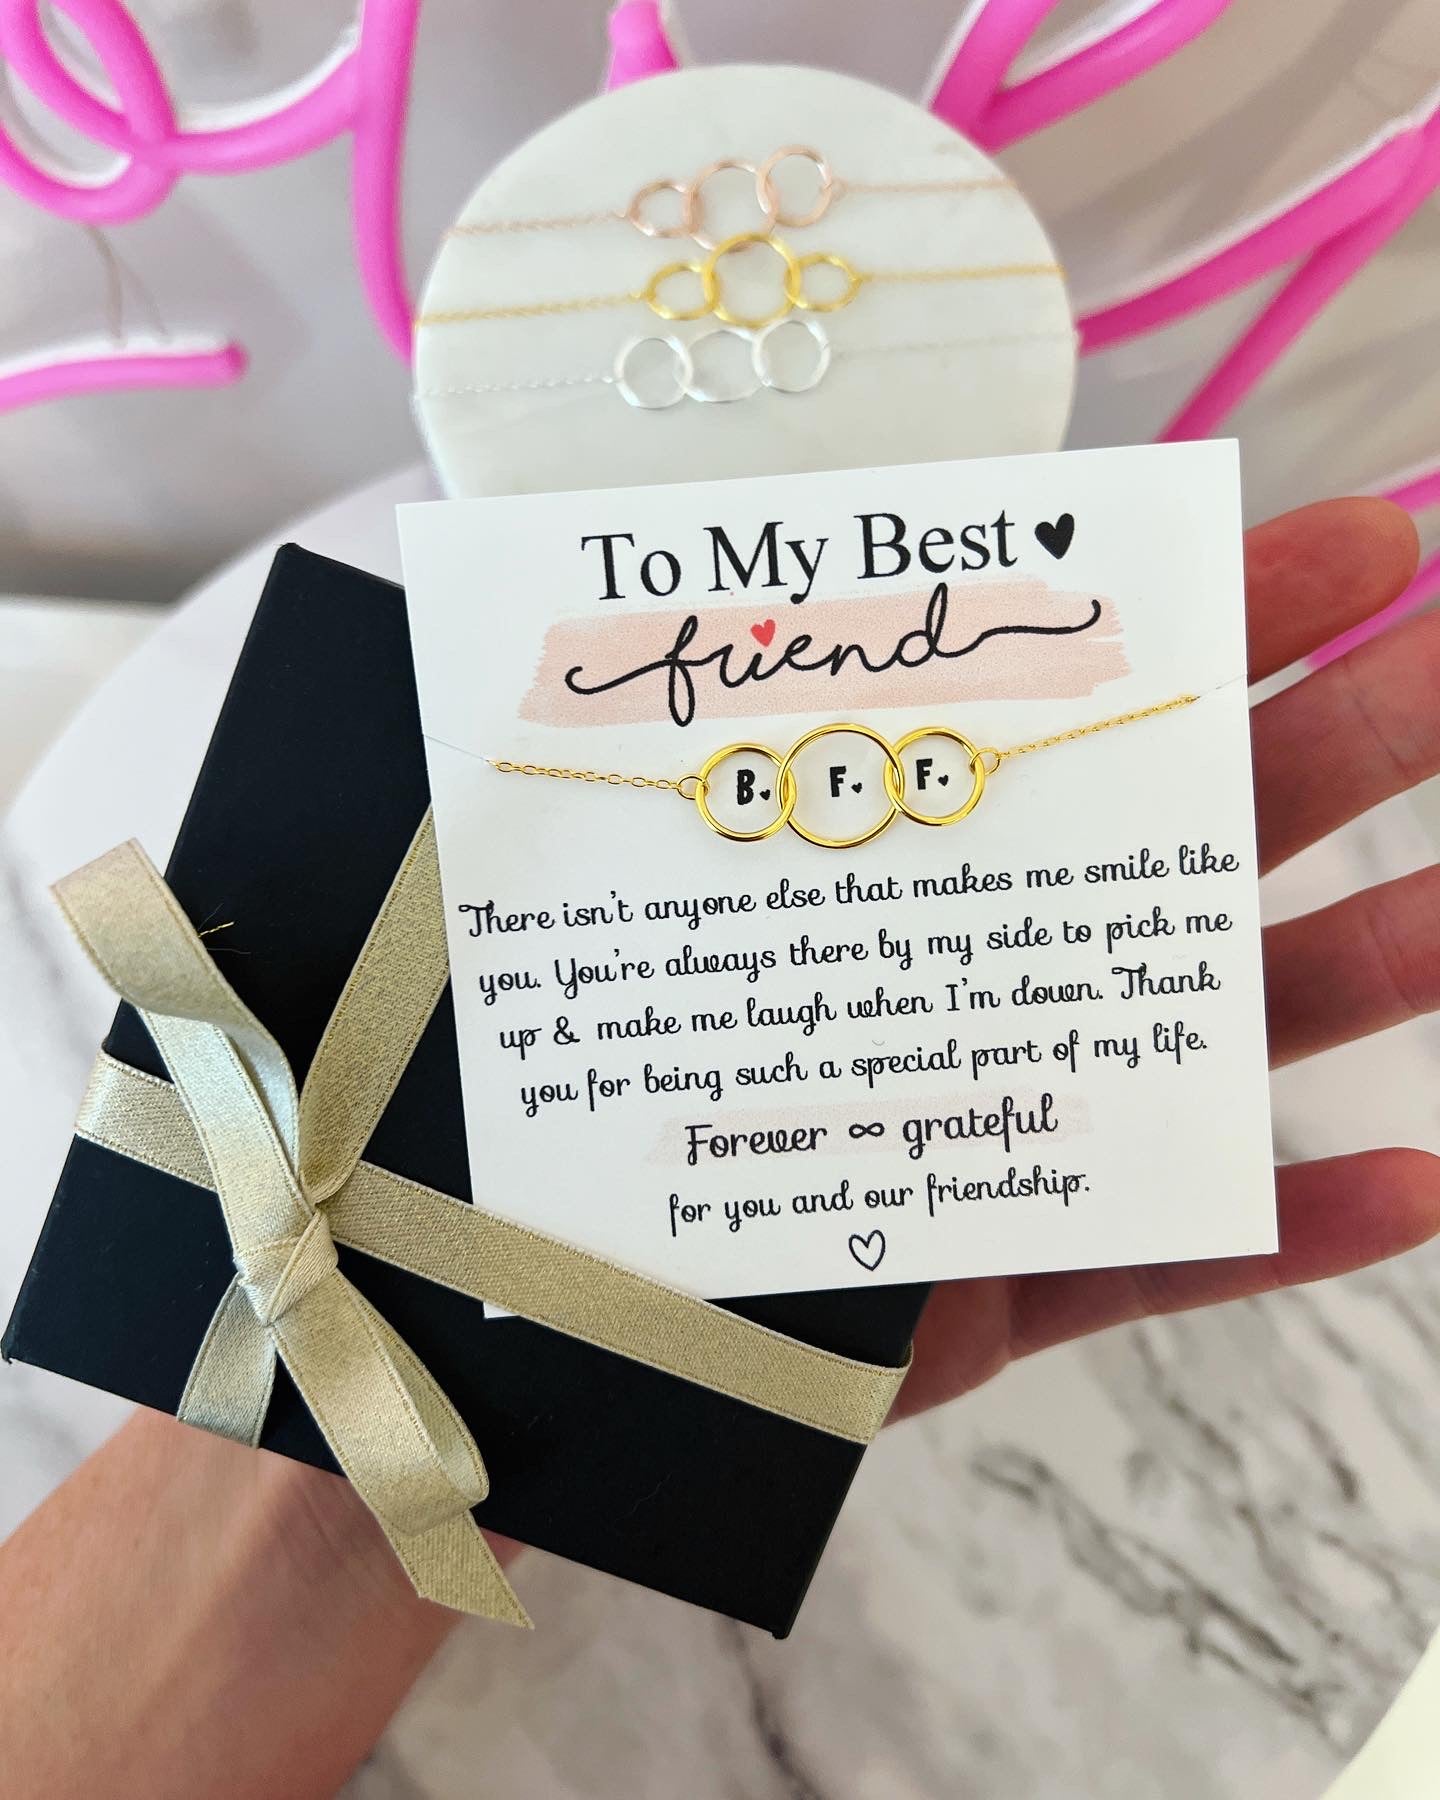 Best Friend Necklace! Triple hoop infinity necklace, card, box + ribbon included! Friends Forever, Christmas gift!